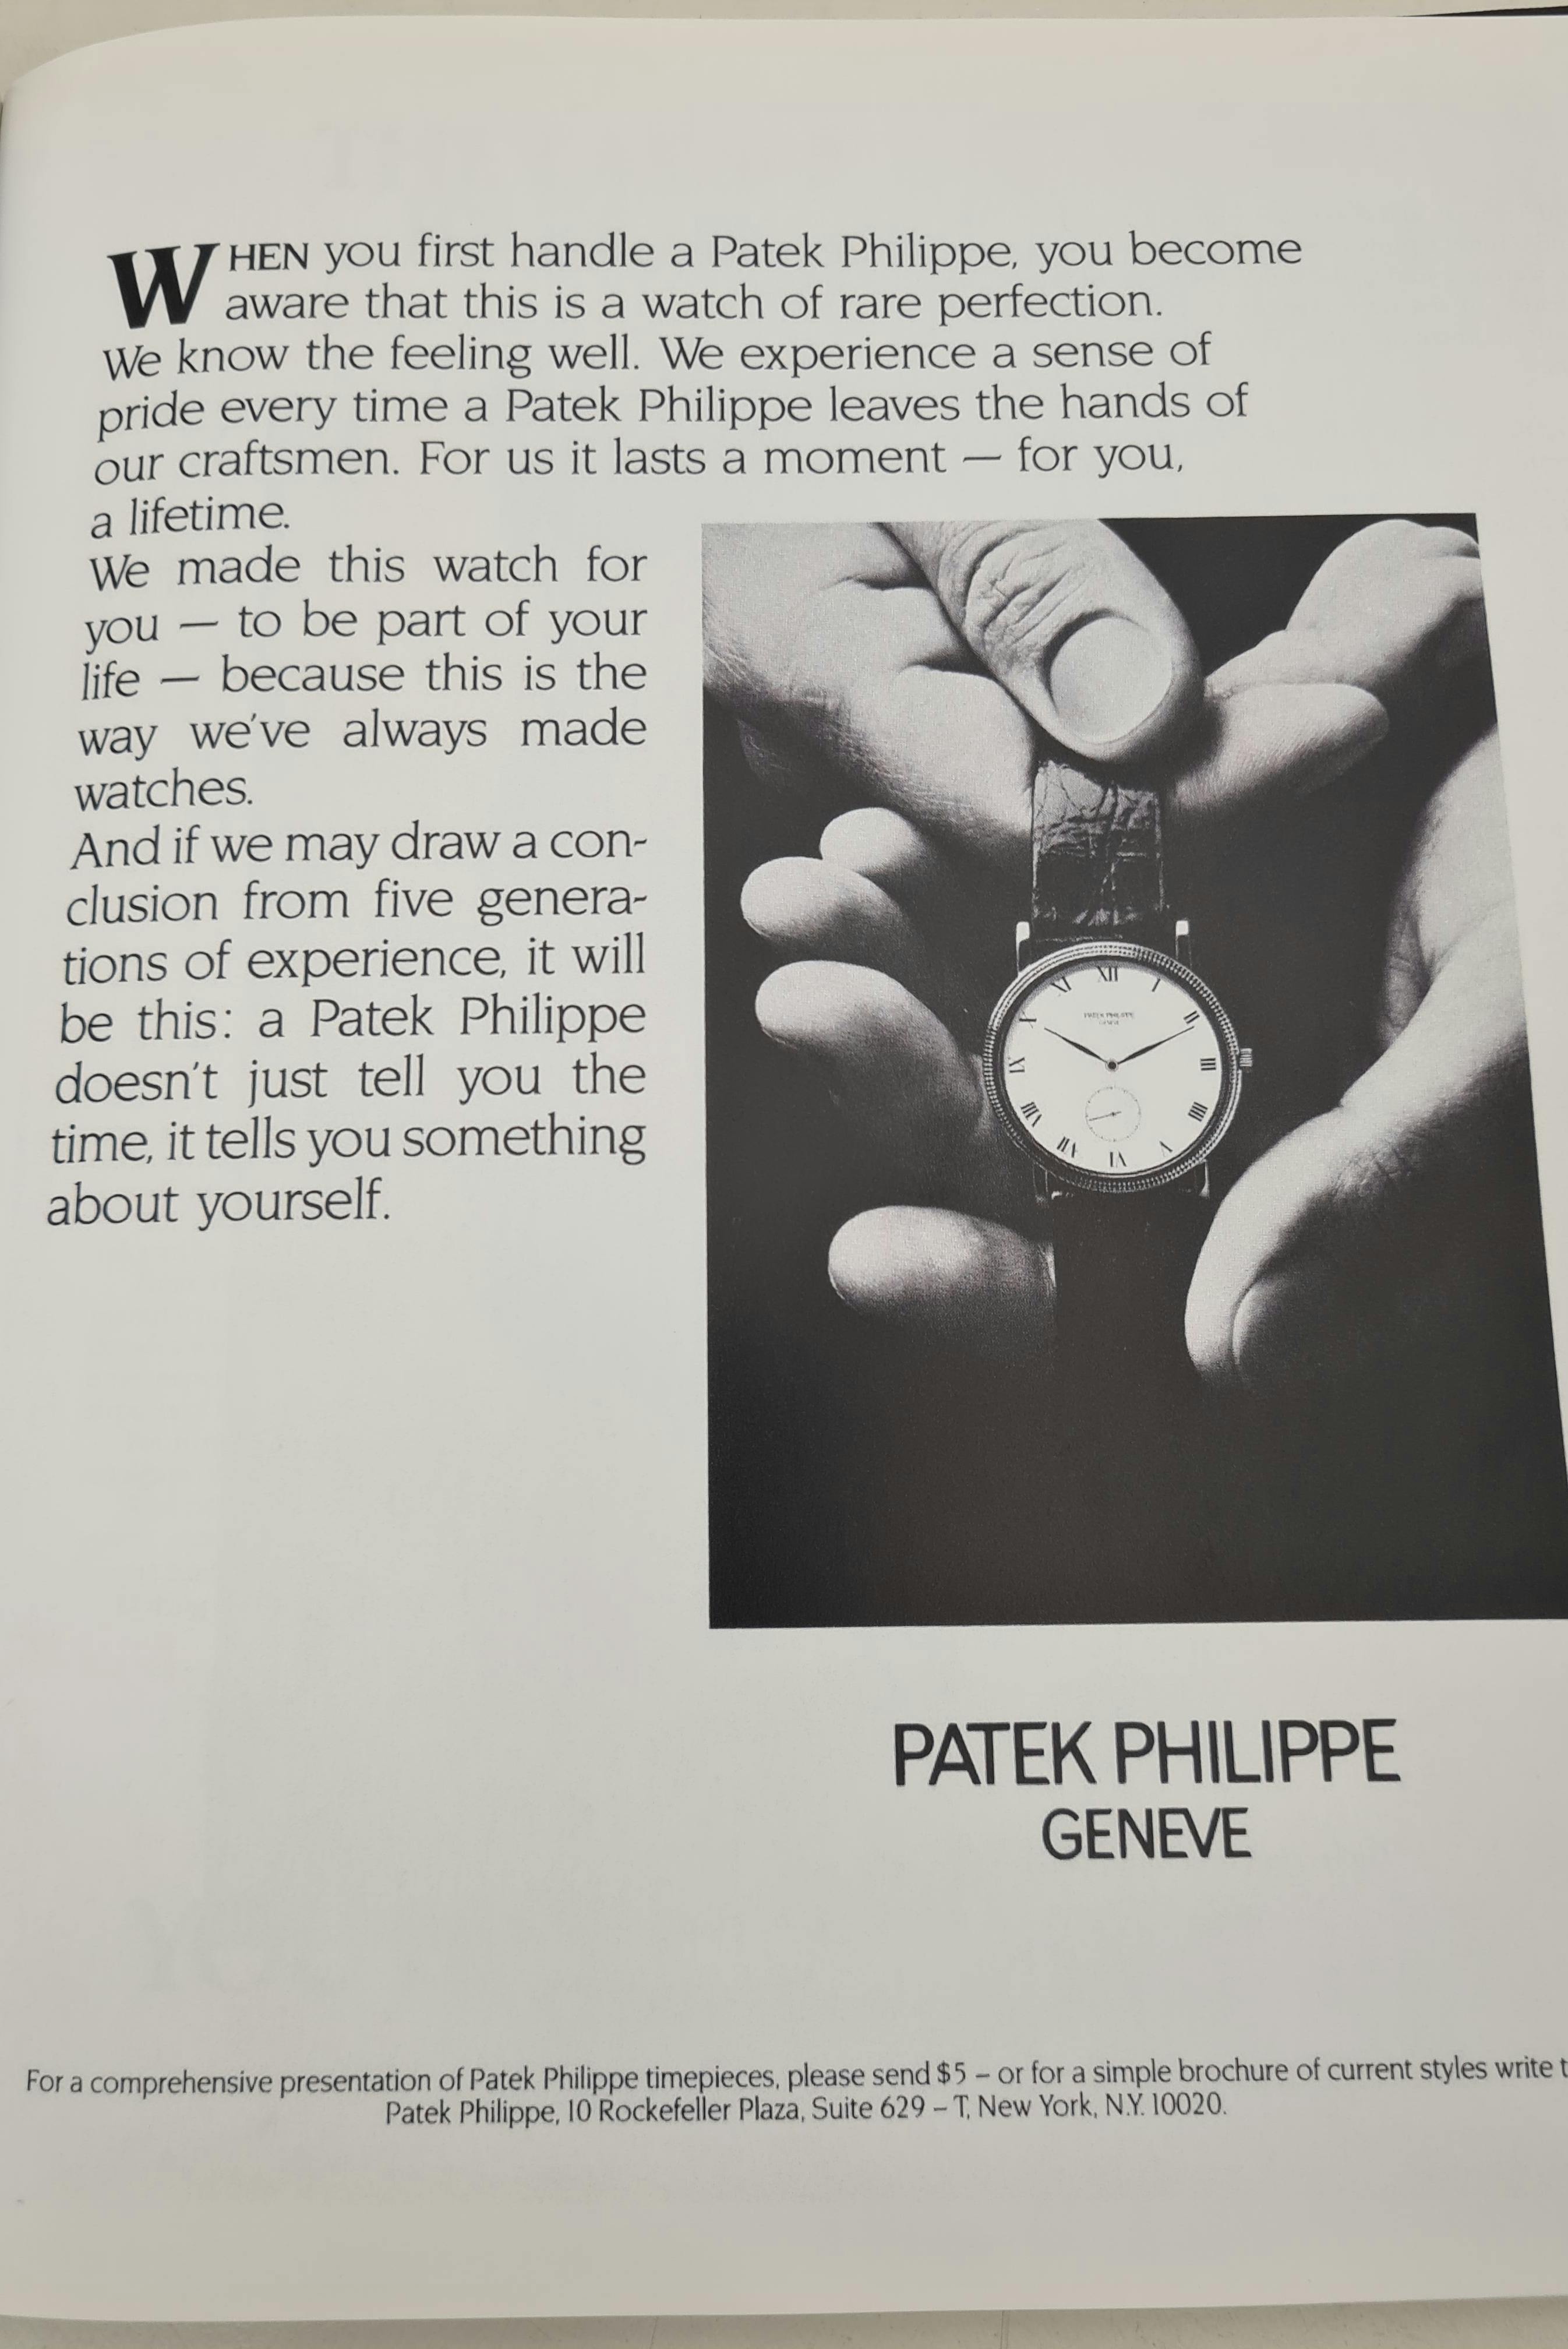 Patek Philippe brand advert from the 1980s, emphasising how it makes you feel.